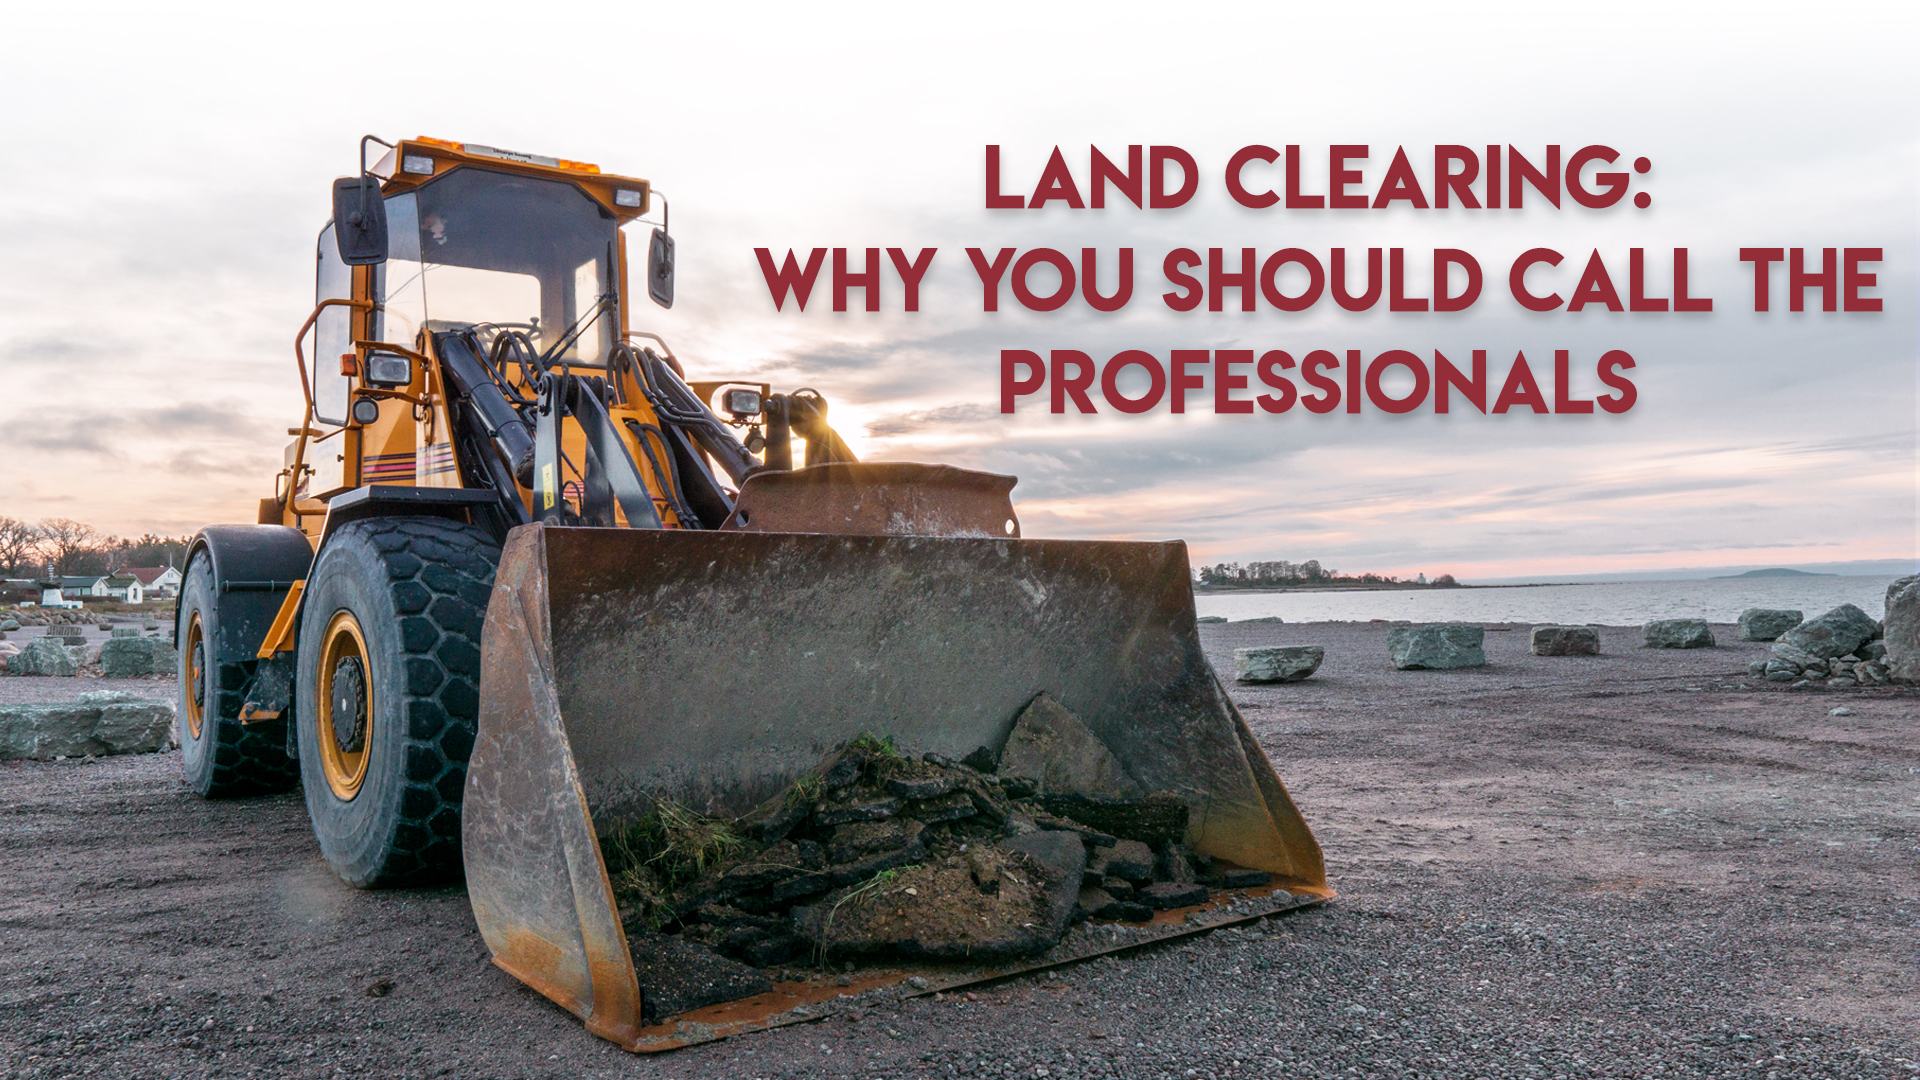 Land clearing, Ground Clearing, site development, Steelwrist Equipment, lot clearing near me | Grovin Farms, FL